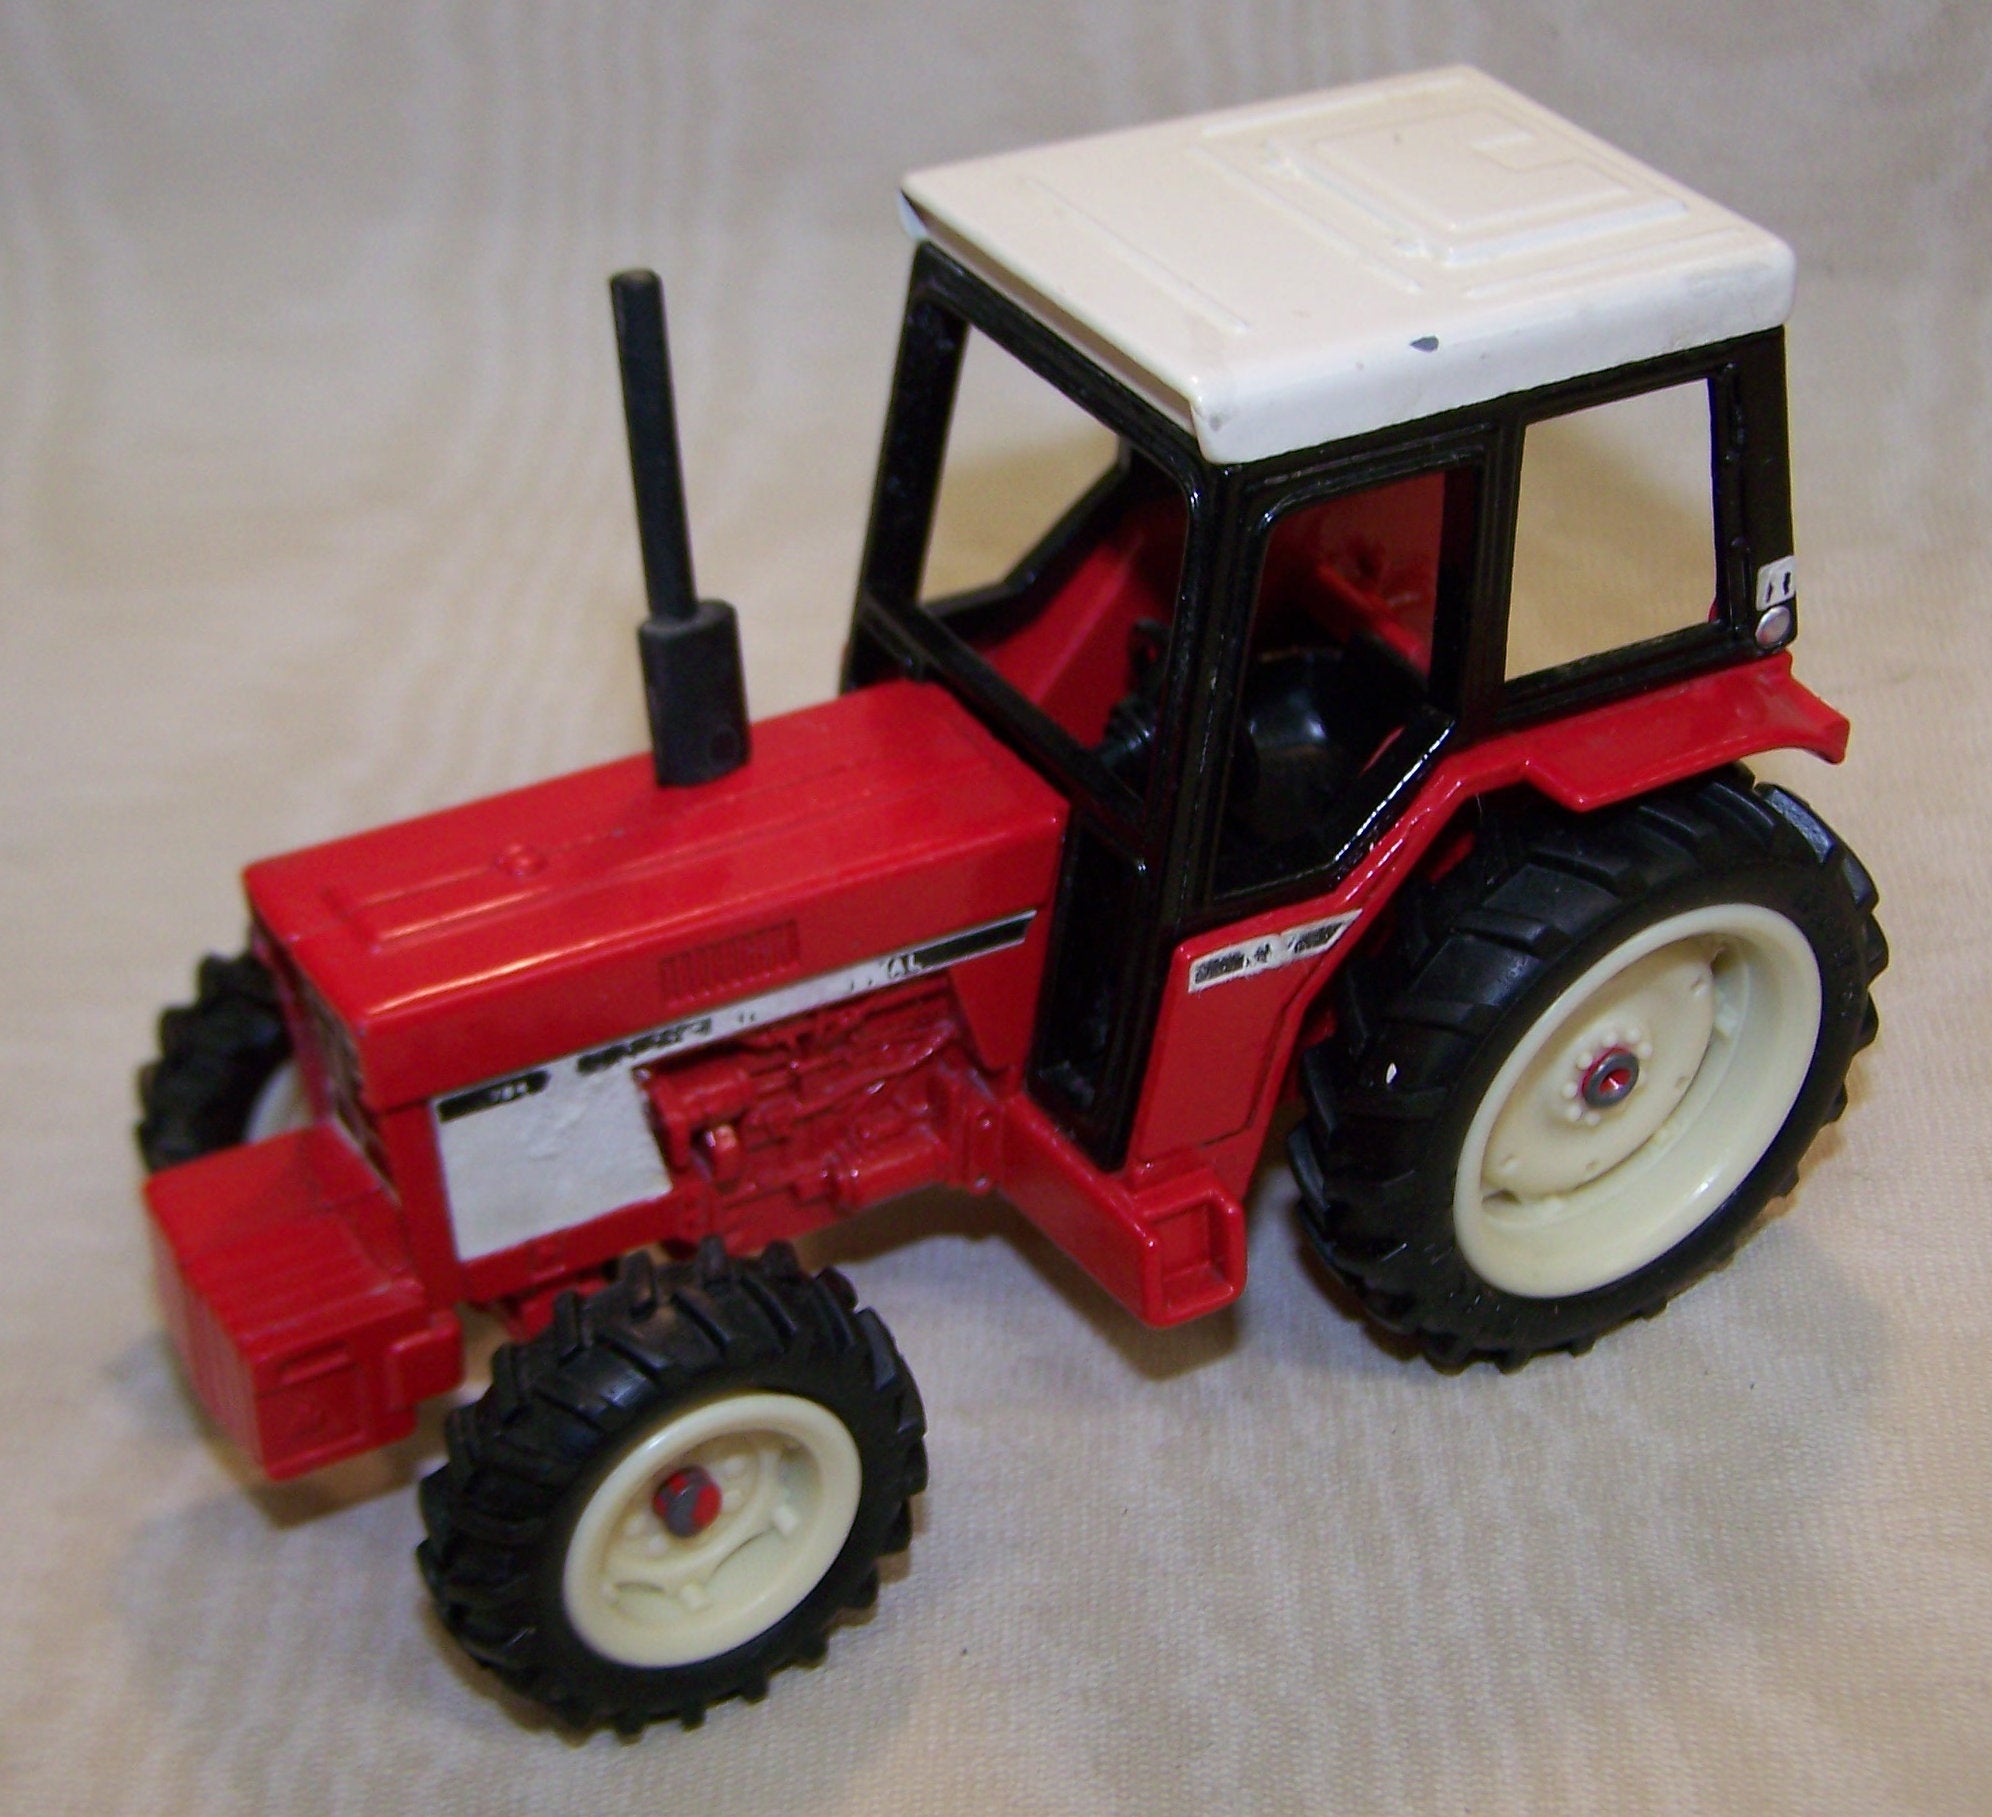 #1638-1 1/32 International 784 FWD Tractor - No Box, AS IS